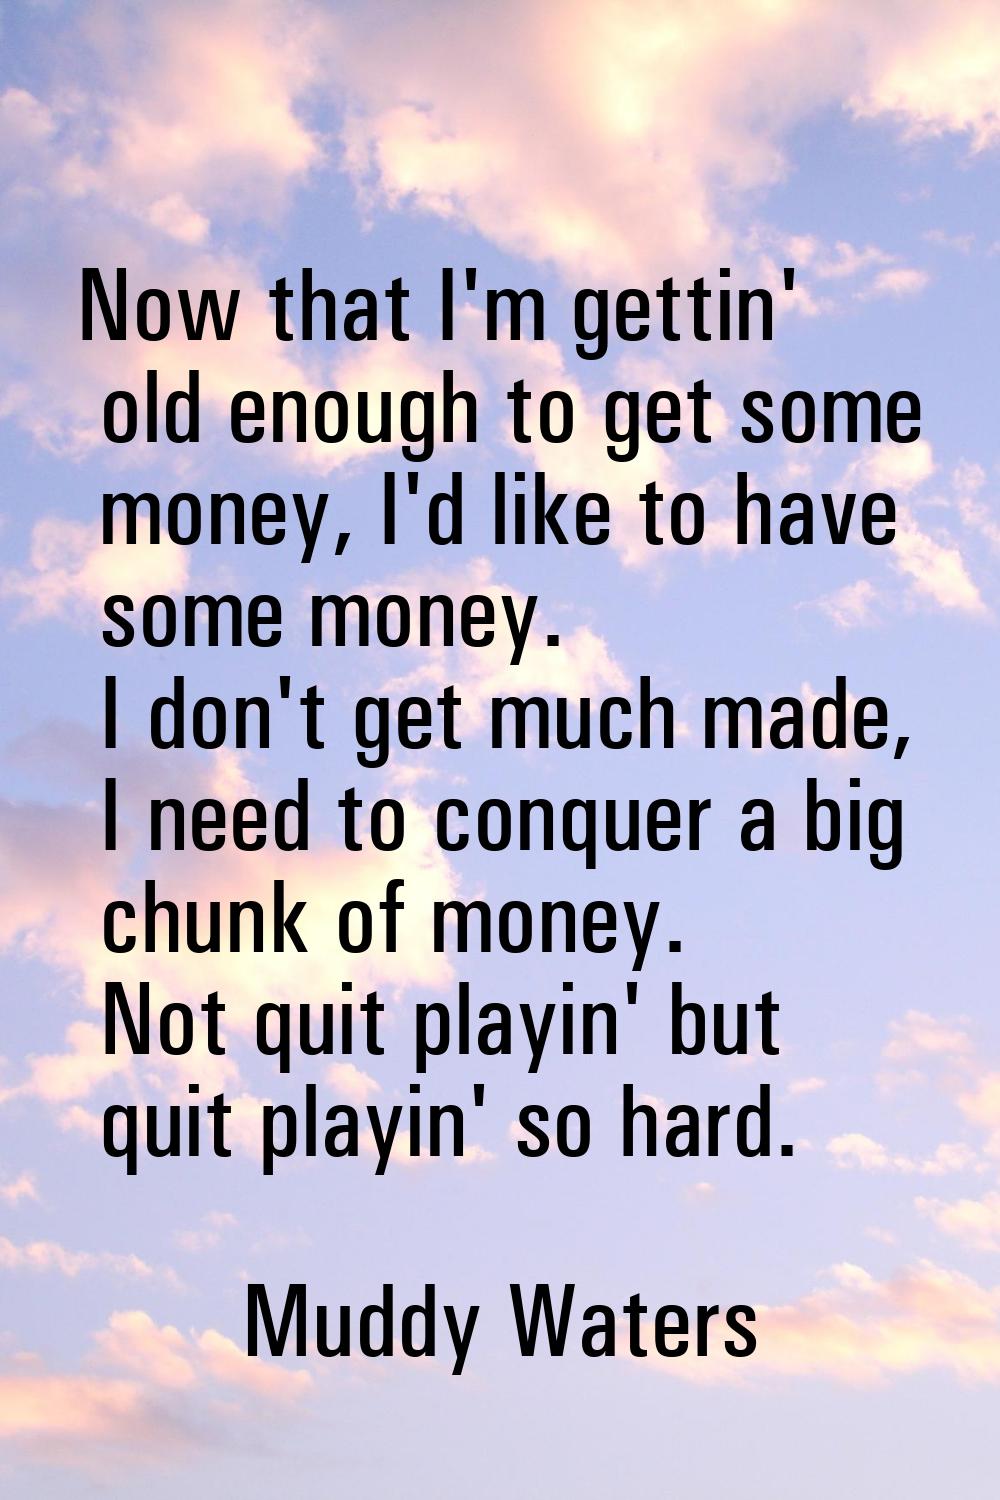 Now that I'm gettin' old enough to get some money, I'd like to have some money. I don't get much ma